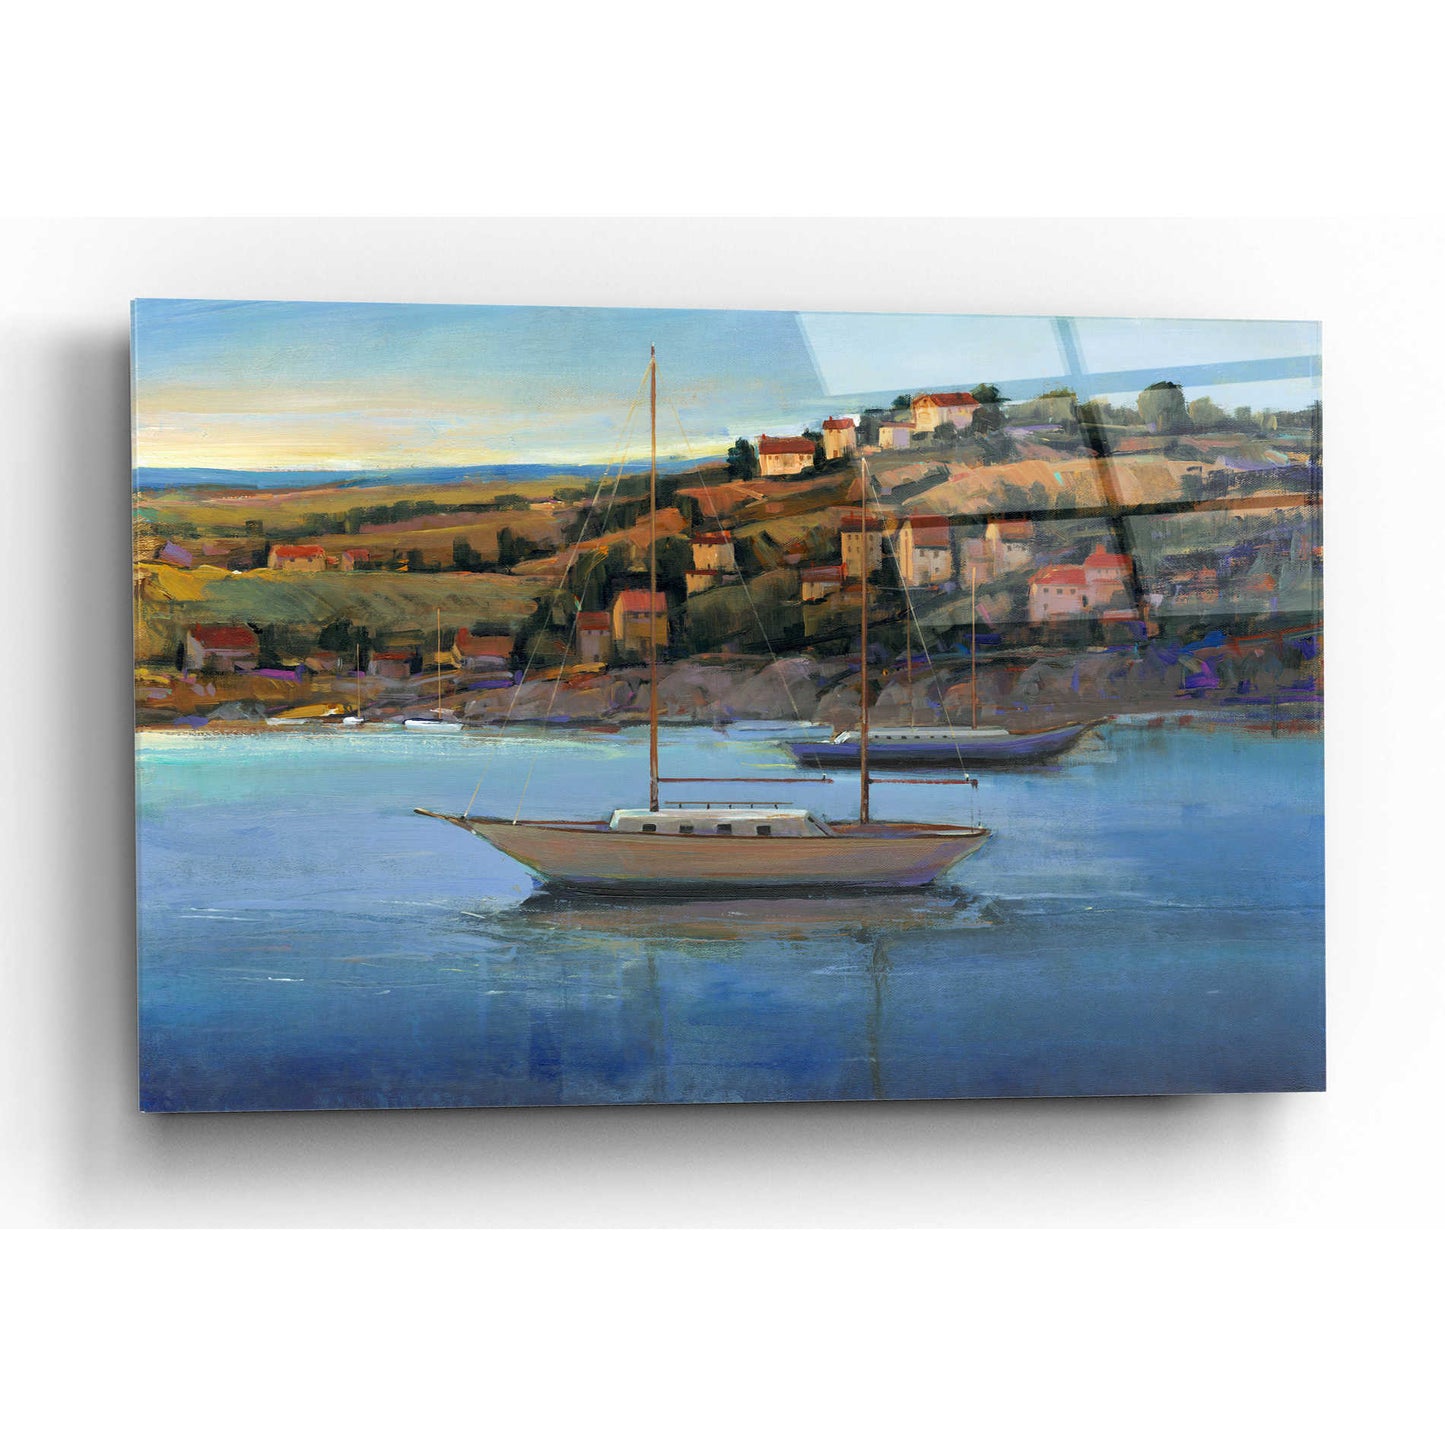 Epic Art 'Harbor View I' by Tim O'Toole, Acrylic Glass Wall Art,16x12